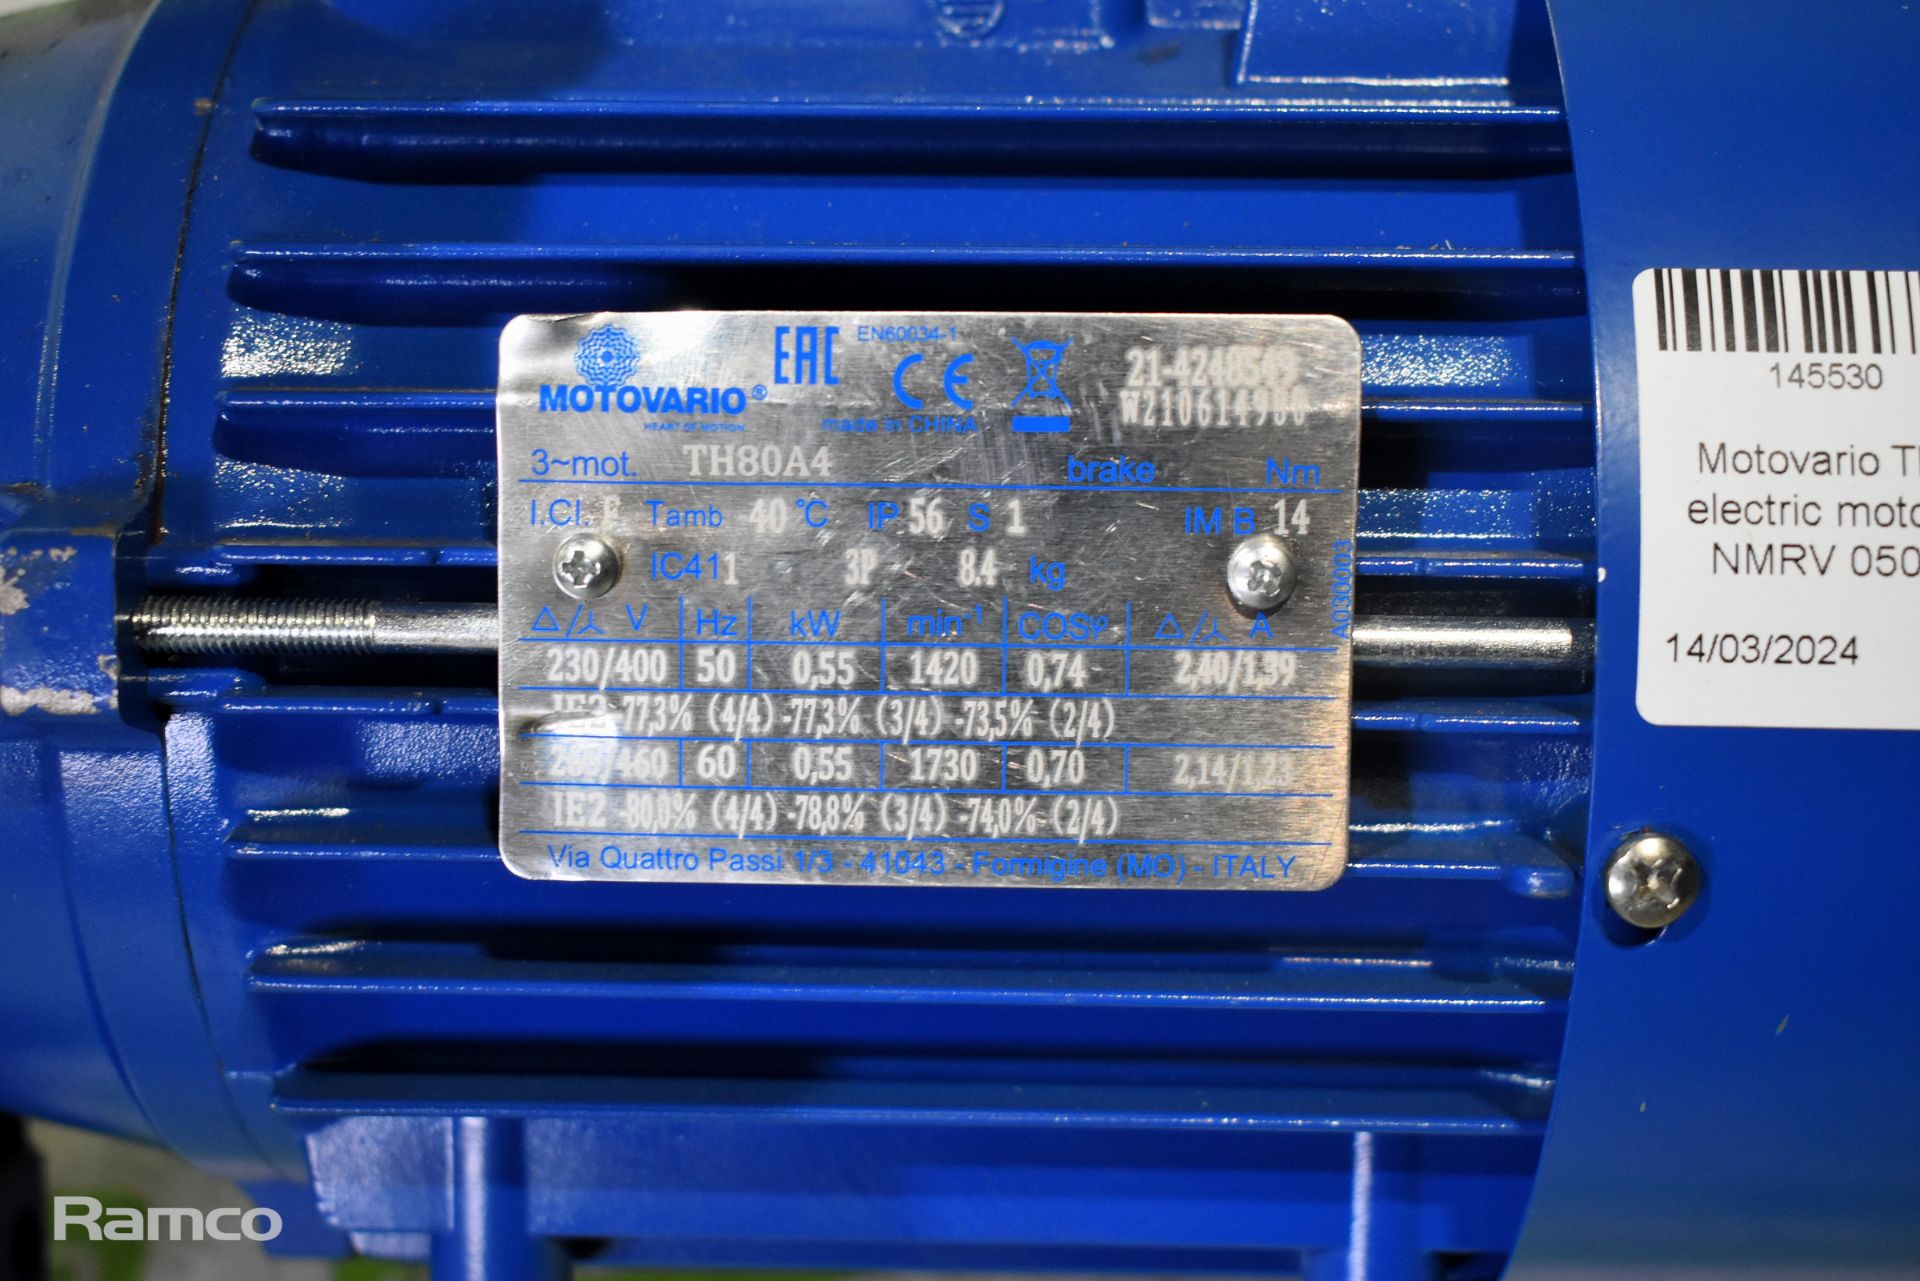 Motovario TH80A4 3 phase electric motor with Motovario NMRV 050 worm gearbox - Image 2 of 5